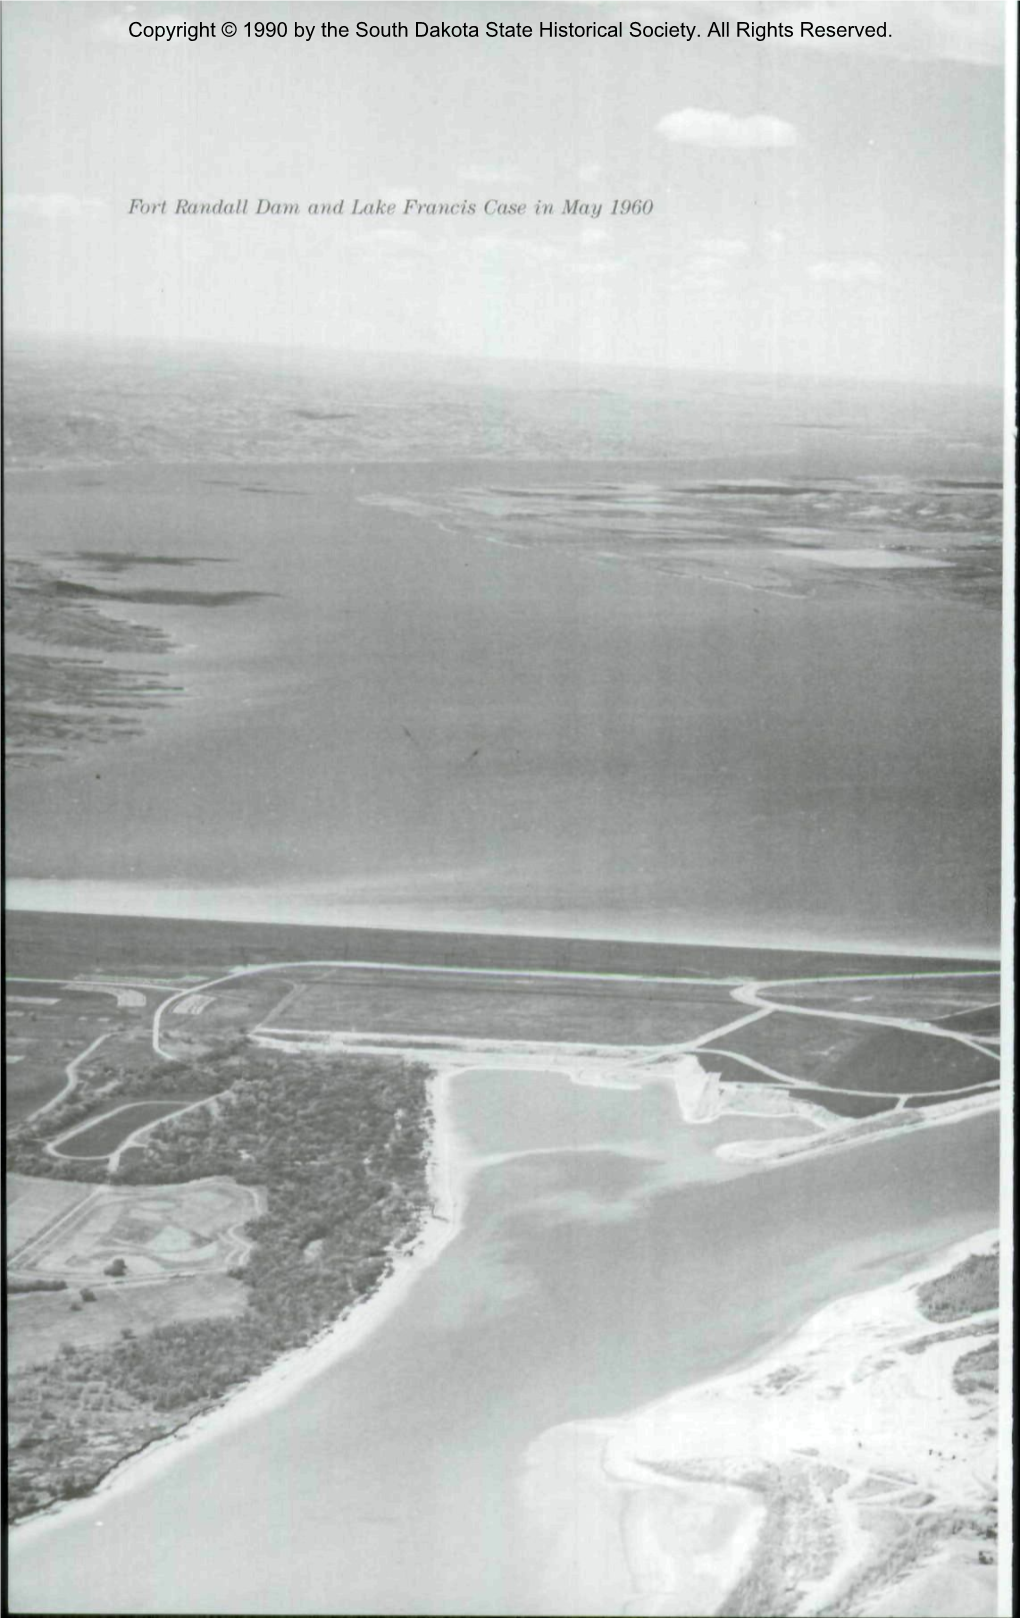 Fort Ríindah Dam and ¡Mke Francis Case in May 1060